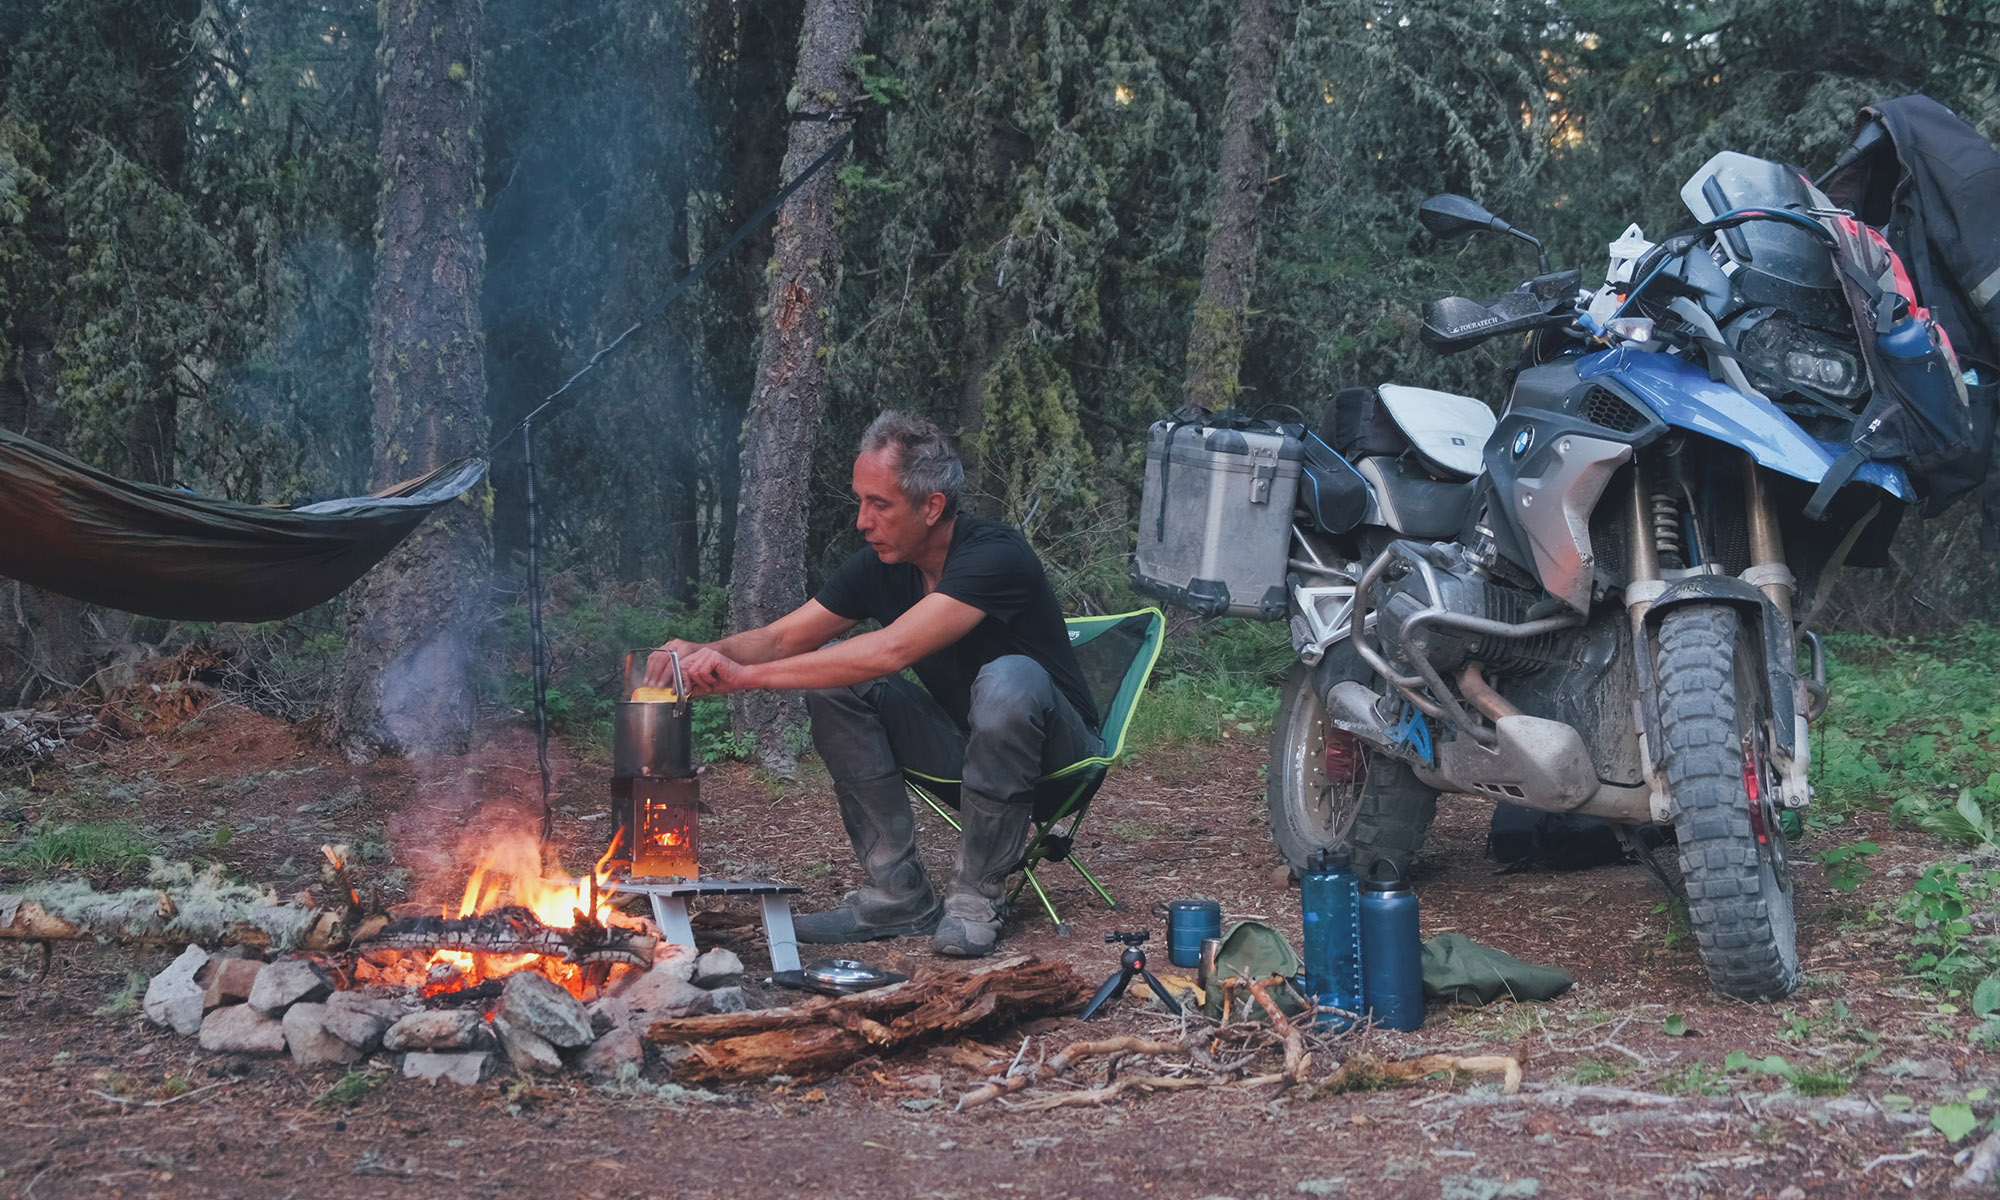 Riding Solo and motorcycle camping remote forest Montana